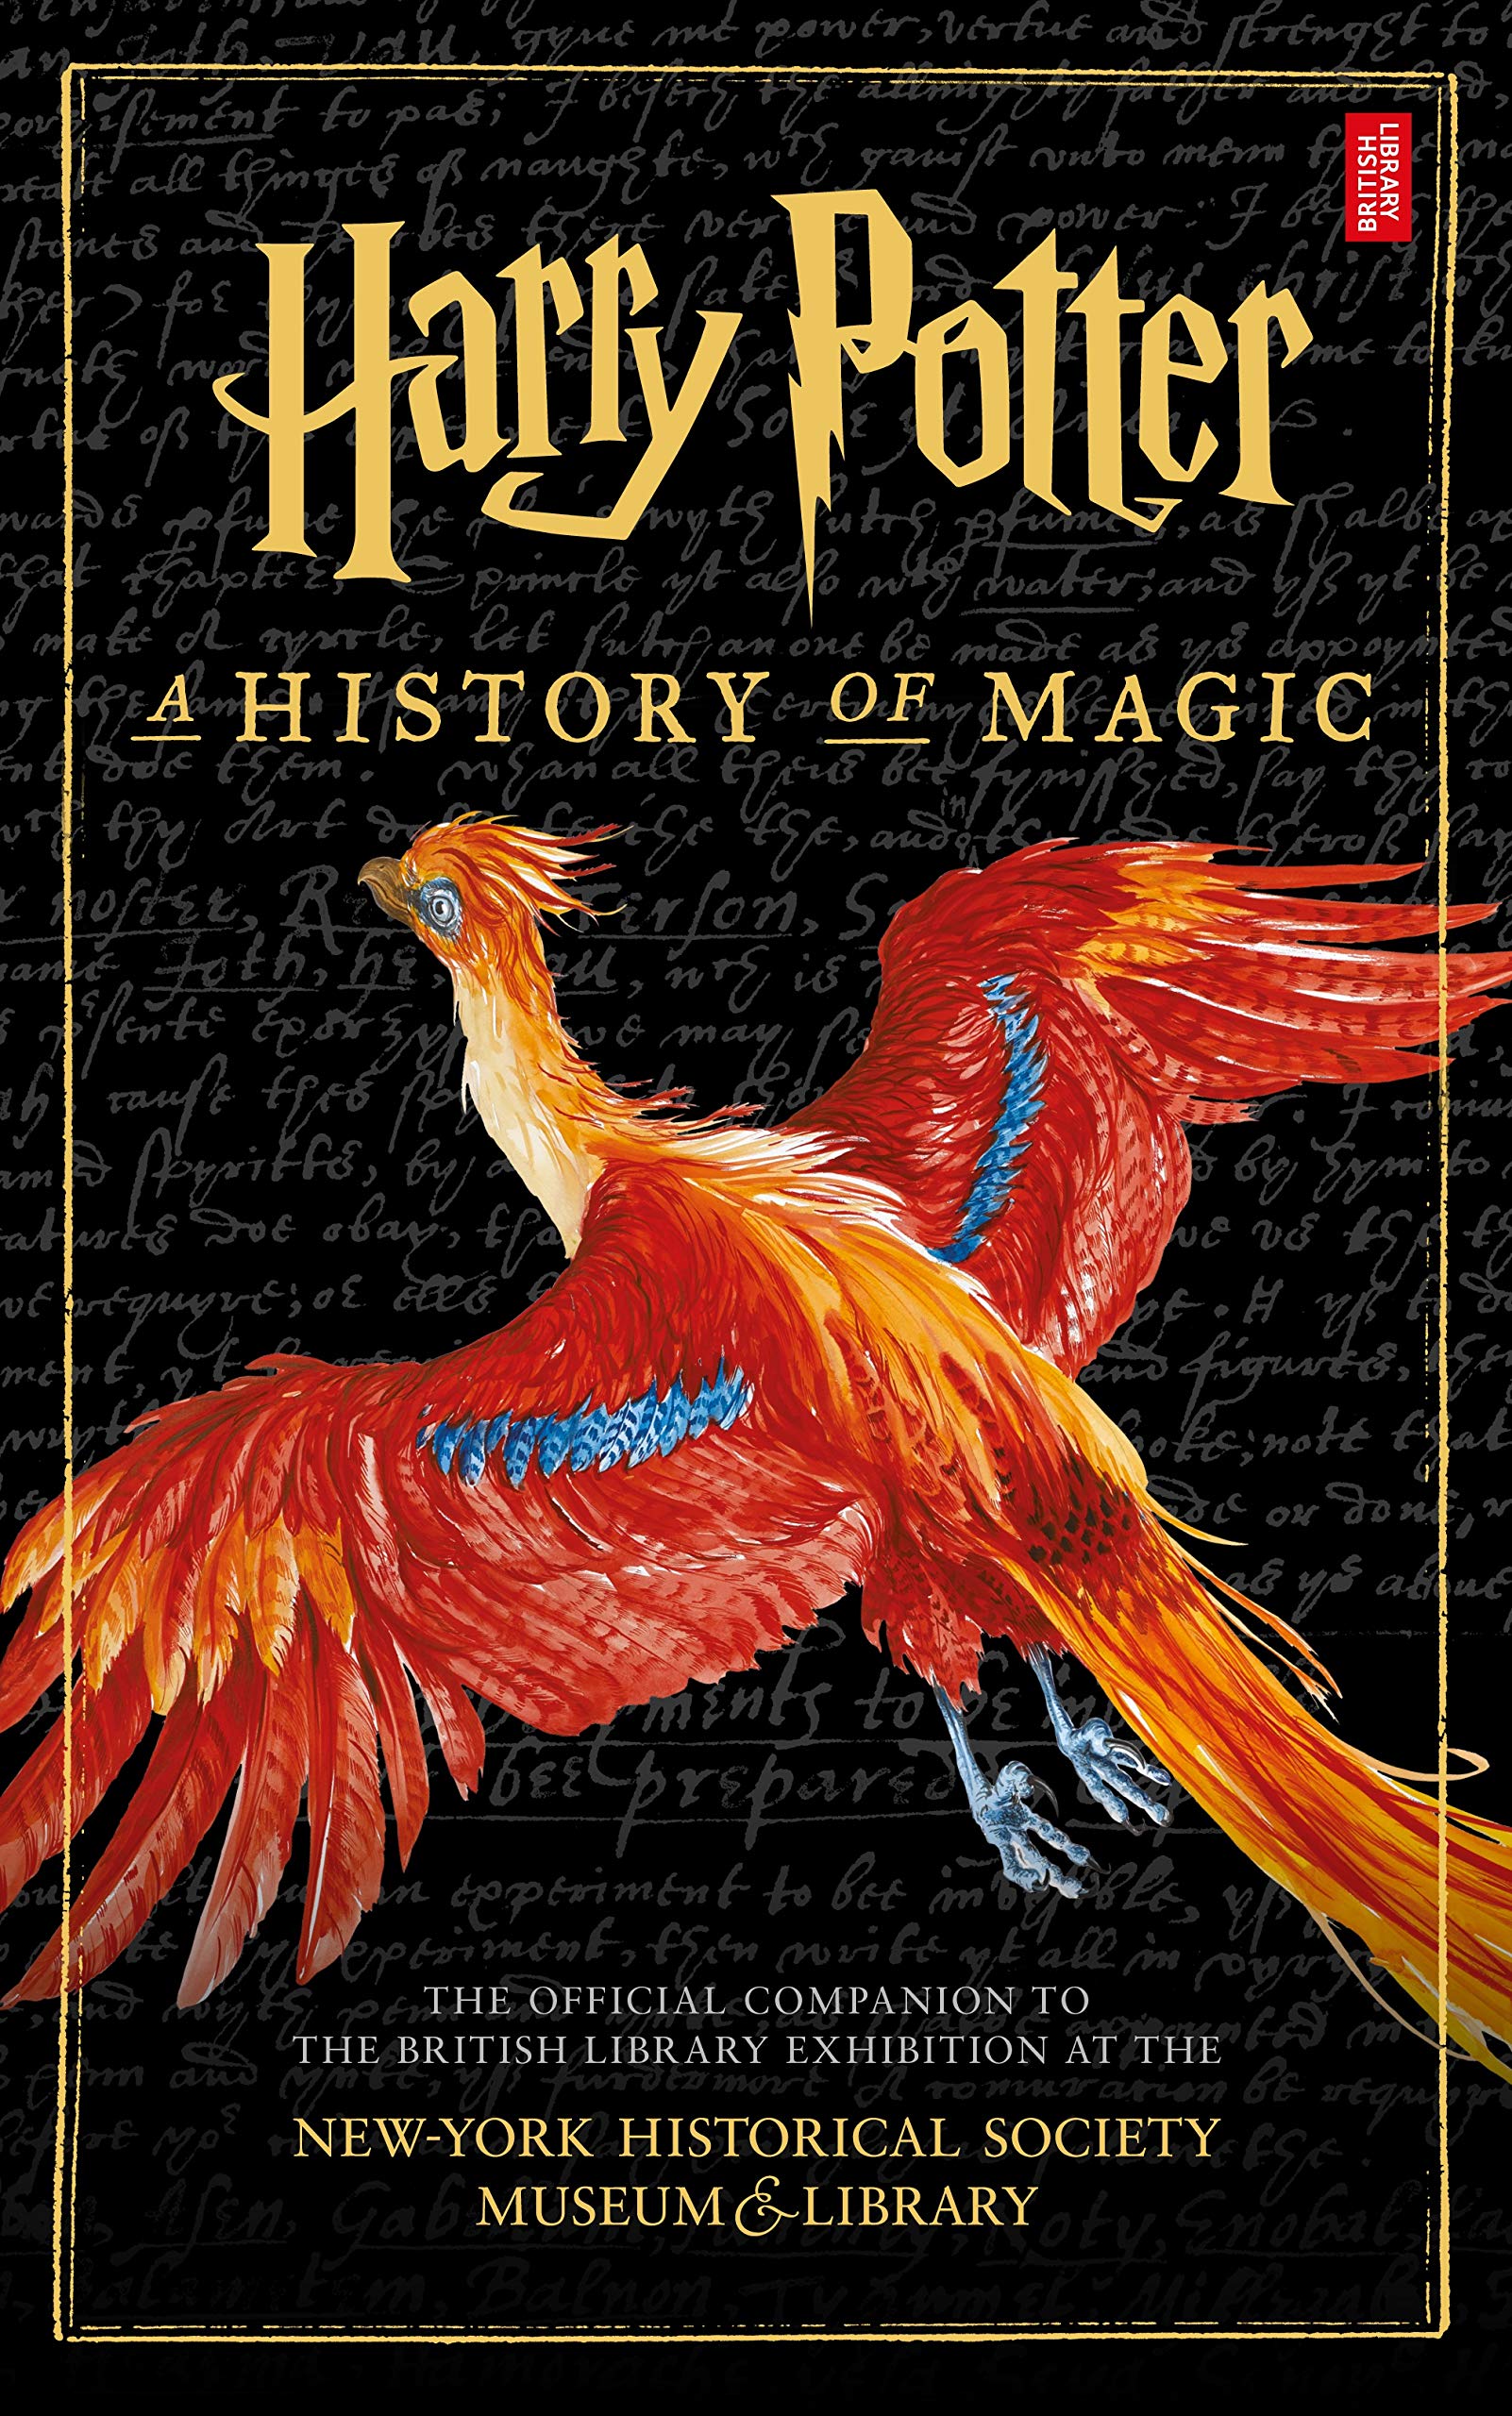 Harry Potter: A History of Magic: The eBook of the Exhibition